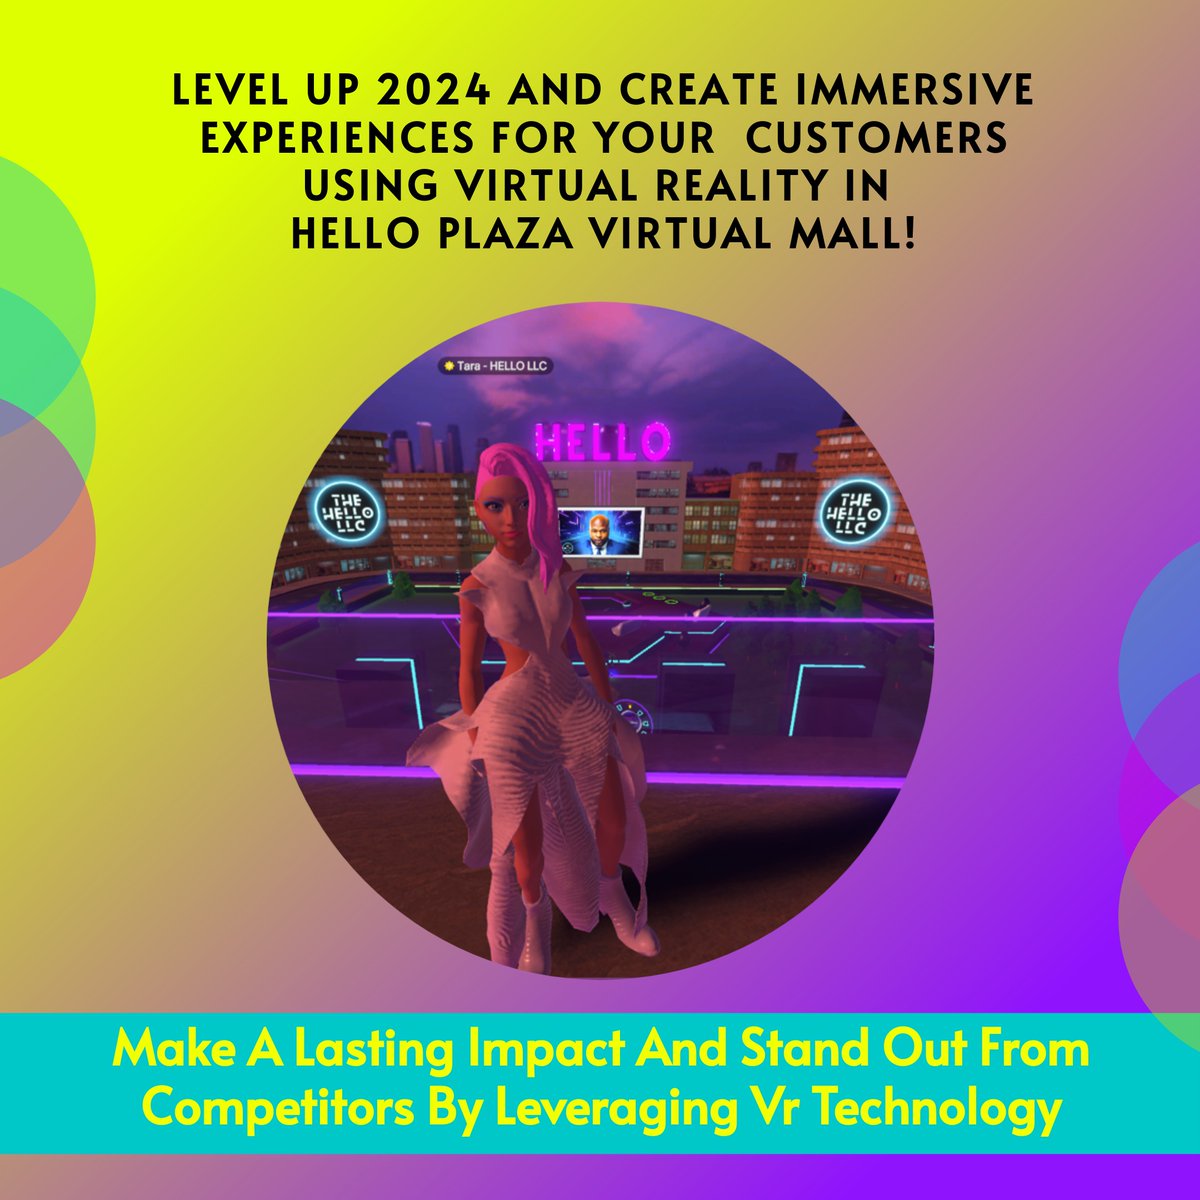 Elevate your game in 2024! Level Up and craft immersive experiences for your customers through Virtual Reality at Hello Plaza Virtual Mall. 🚀✨

#LevelUp2024 #VirtualReality #HelloPlaza'